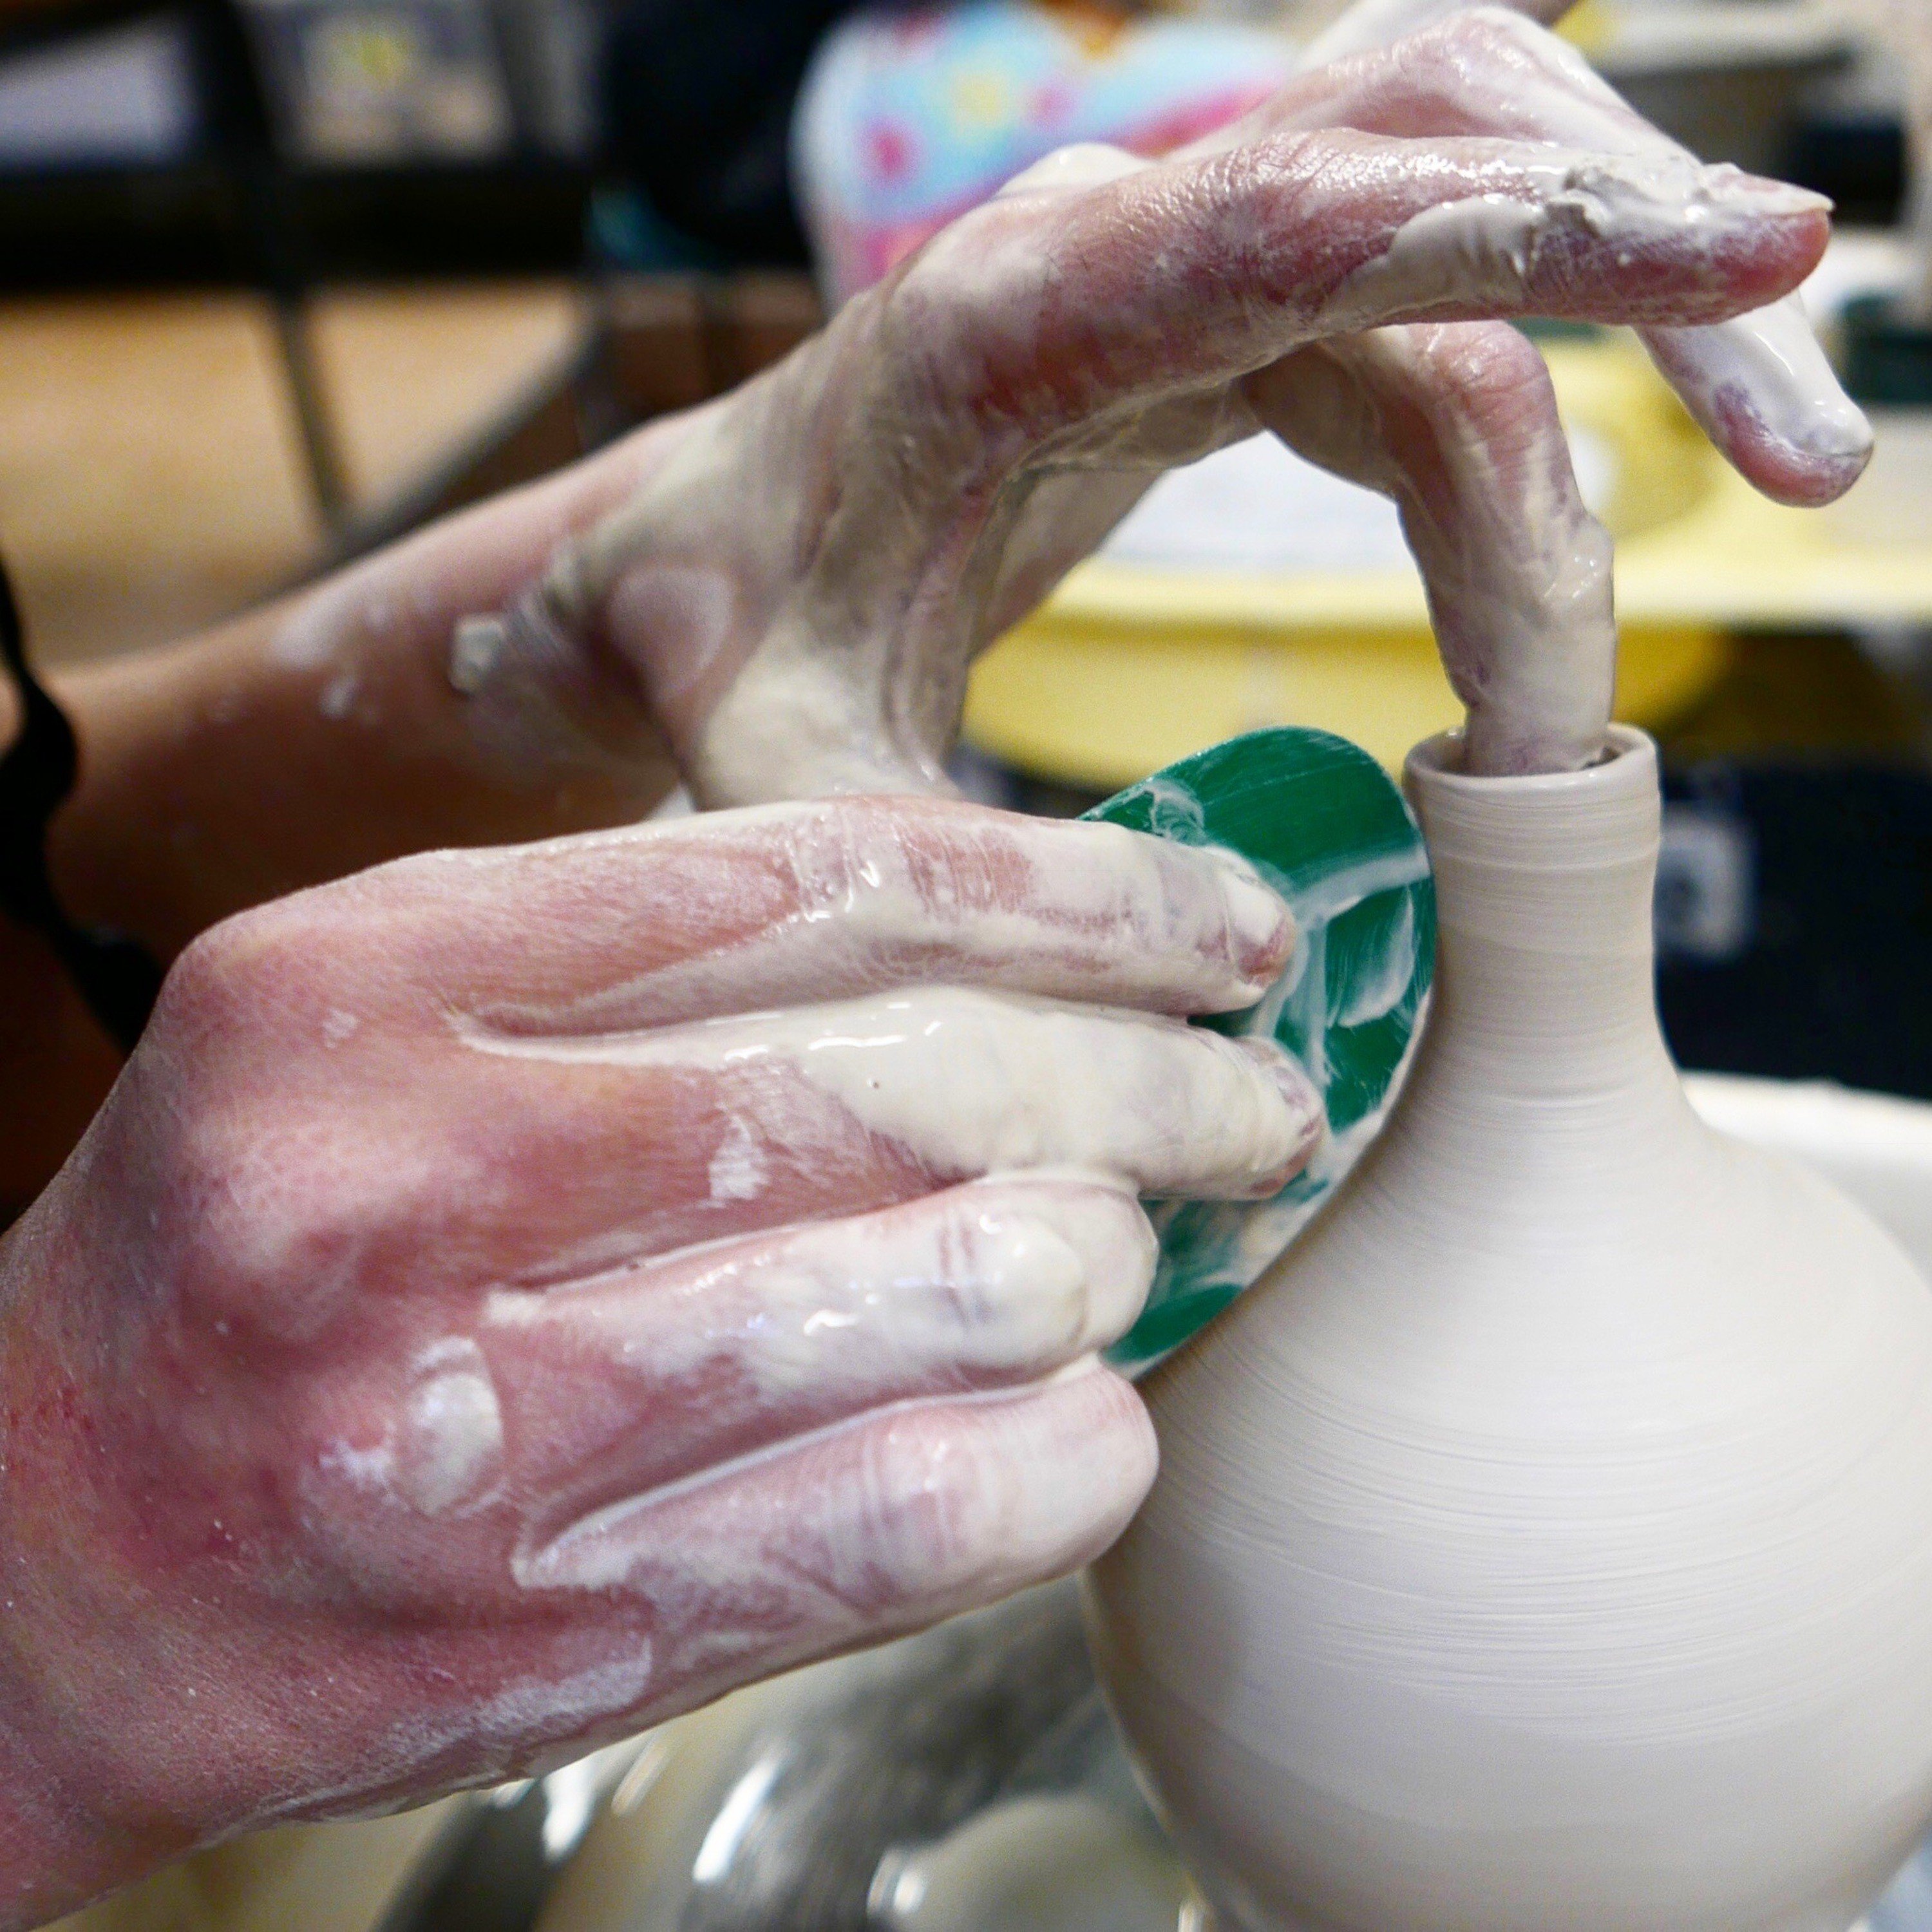 Art as Meditation: How Pottery Can Strengthen Your Mind-Body Connection